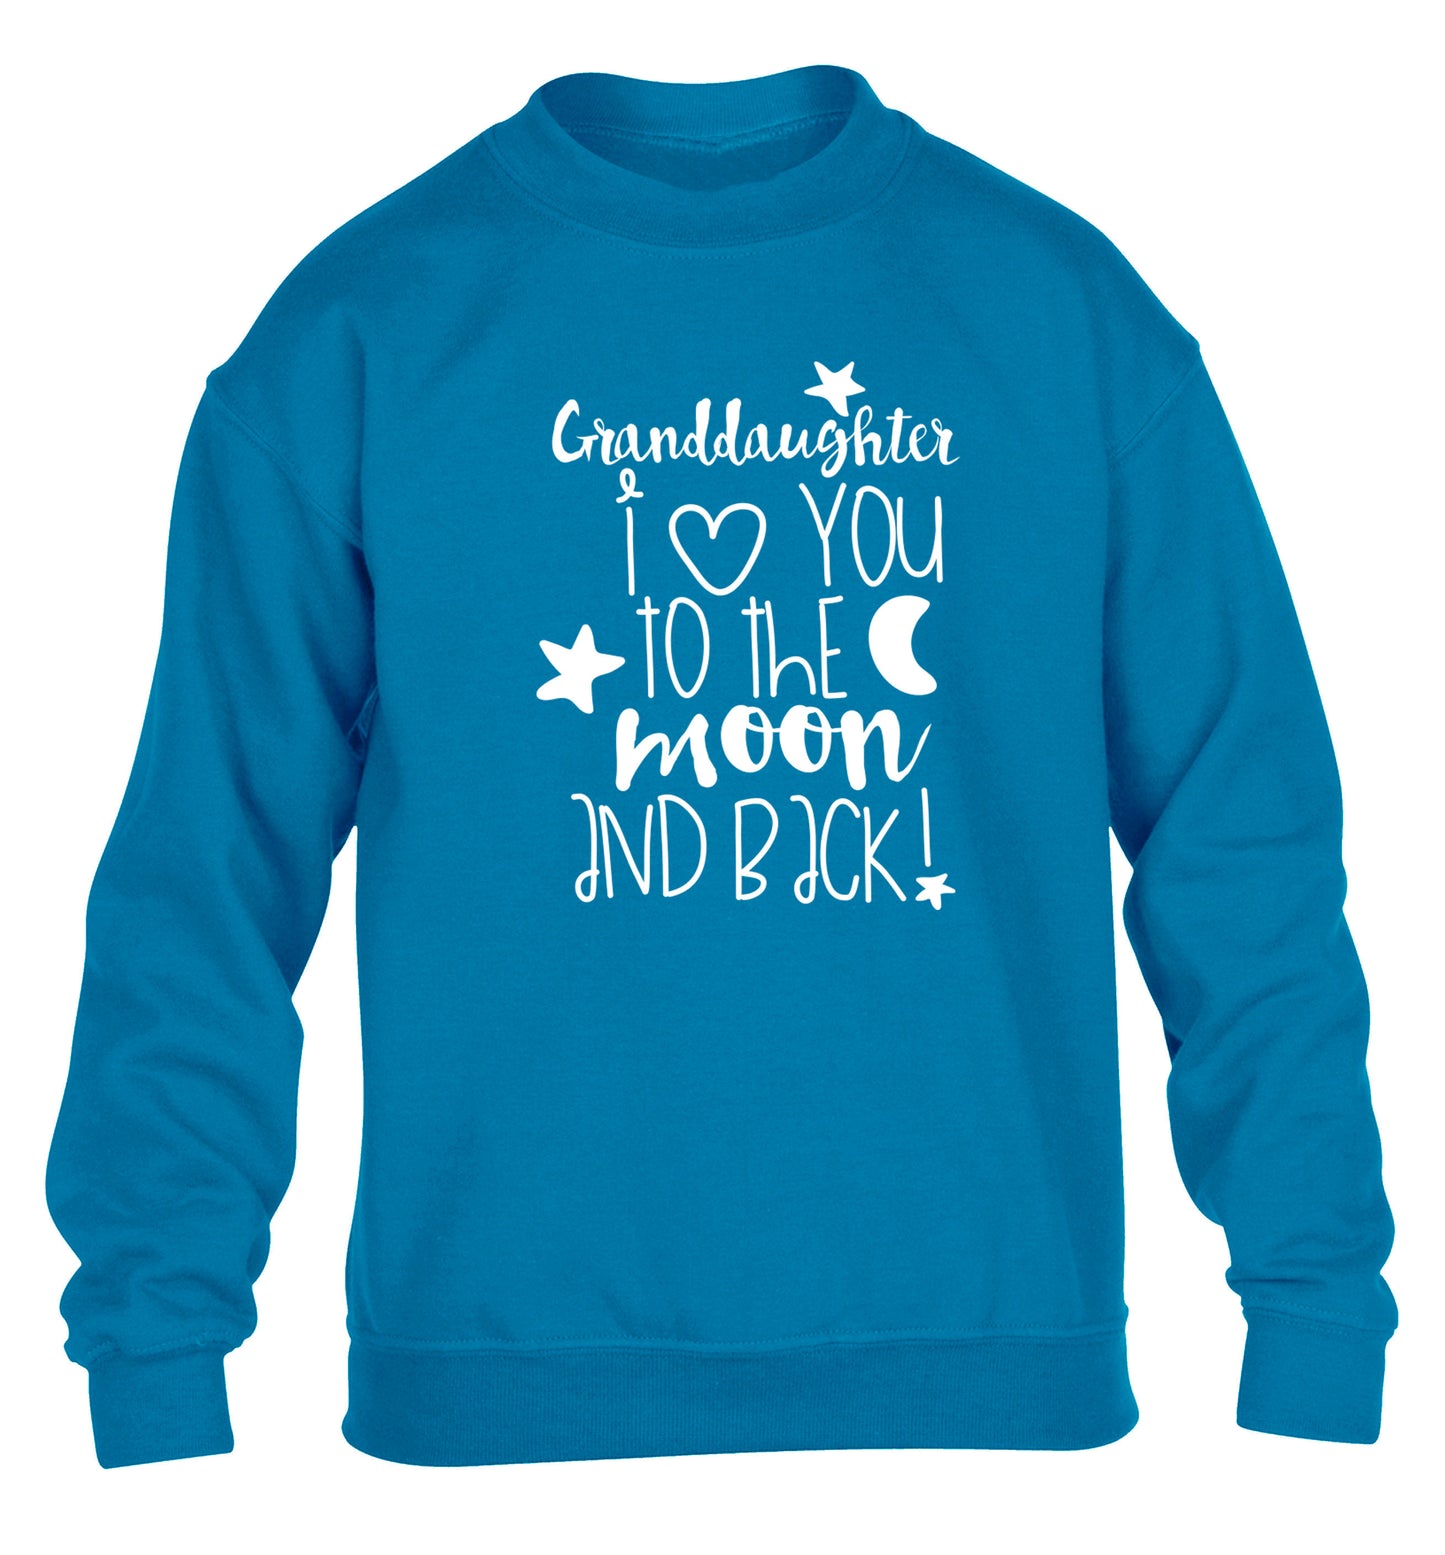 Granddaughter I love you to the moon and back children's blue  sweater 12-14 Years